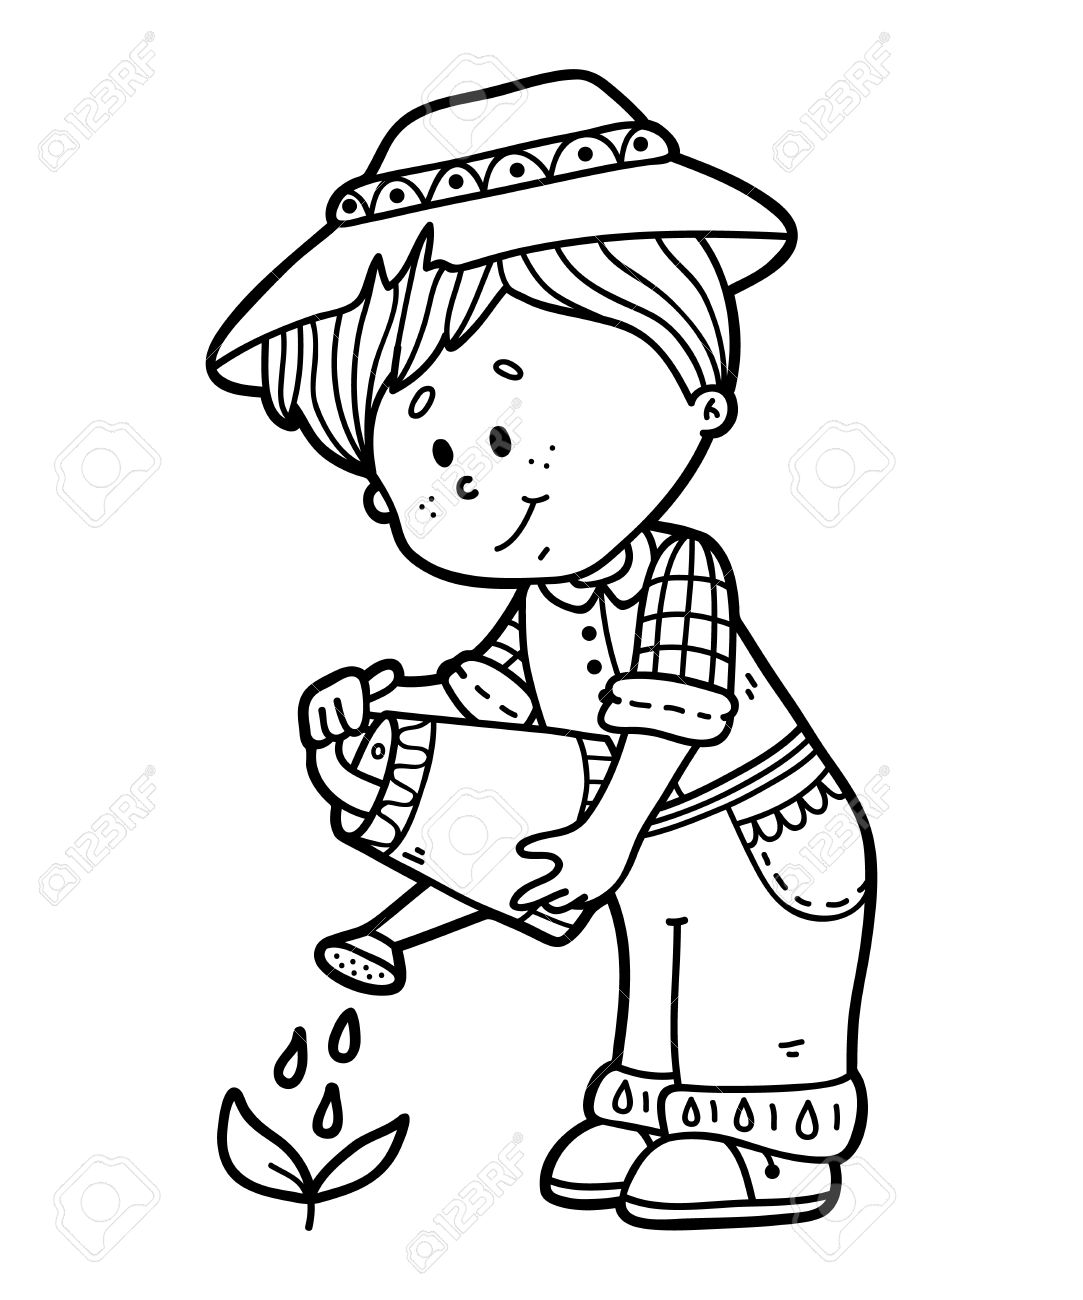 Gardener Printable Coloring Page For Kids - vrogue.co